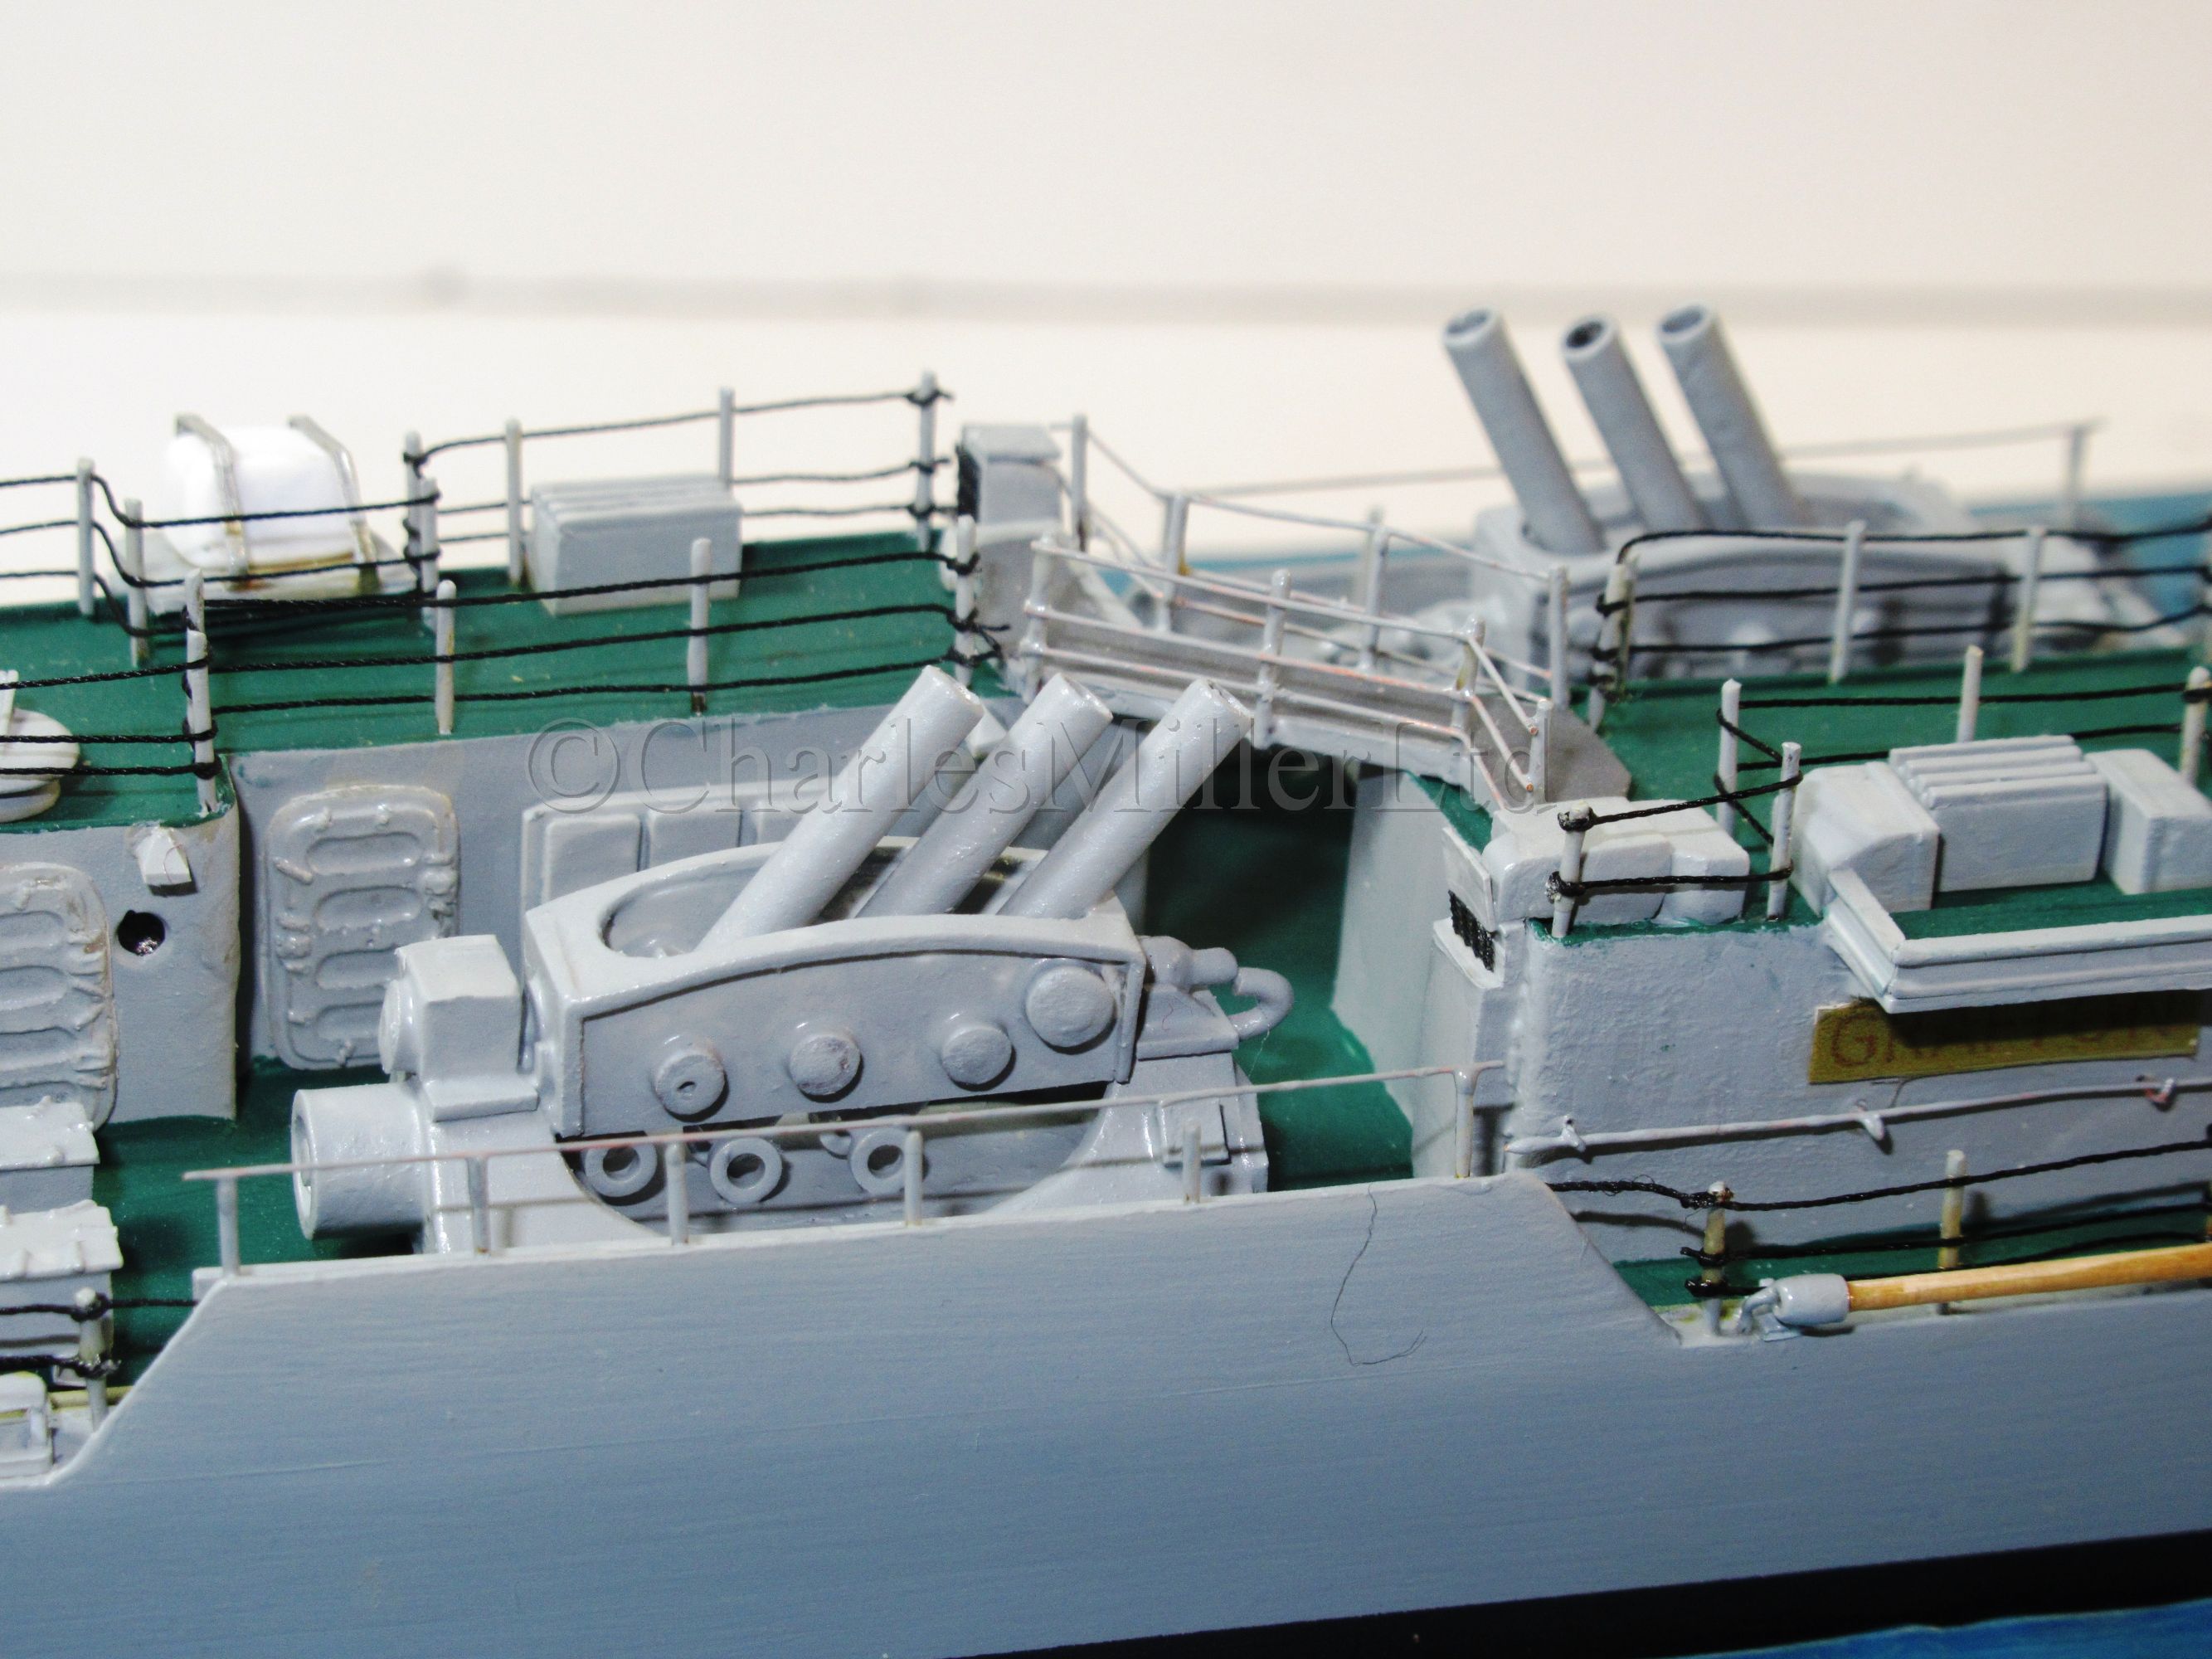 A 1:192 WATERLINE MODEL FOR THE TYPE 14 BLACKWOOD CLASS FRIGATE HMS GRAFTON (F51), AS FITTED IN - Image 4 of 14